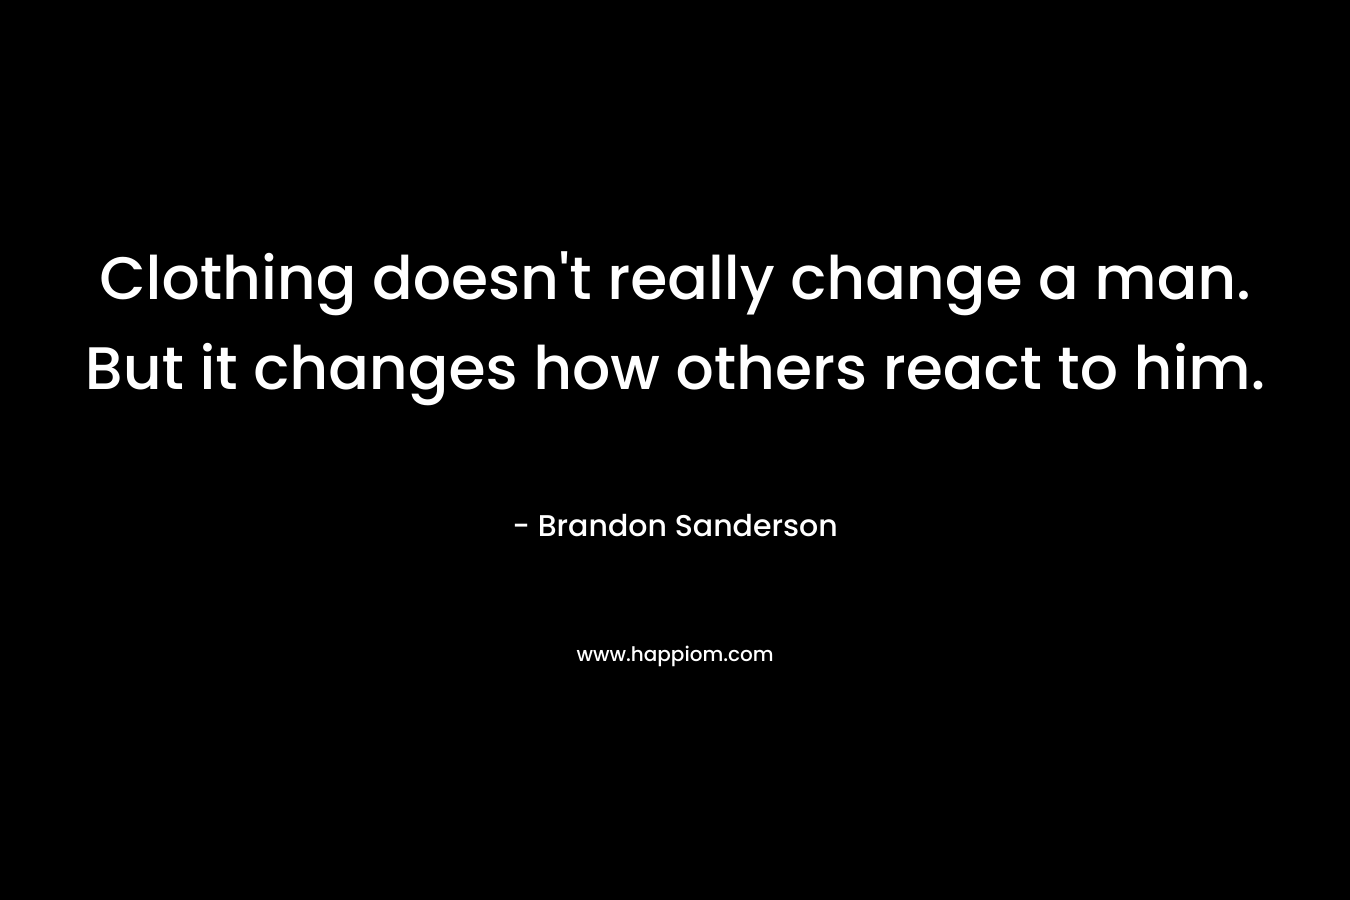 Clothing doesn’t really change a man. But it changes how others react to him. – Brandon Sanderson